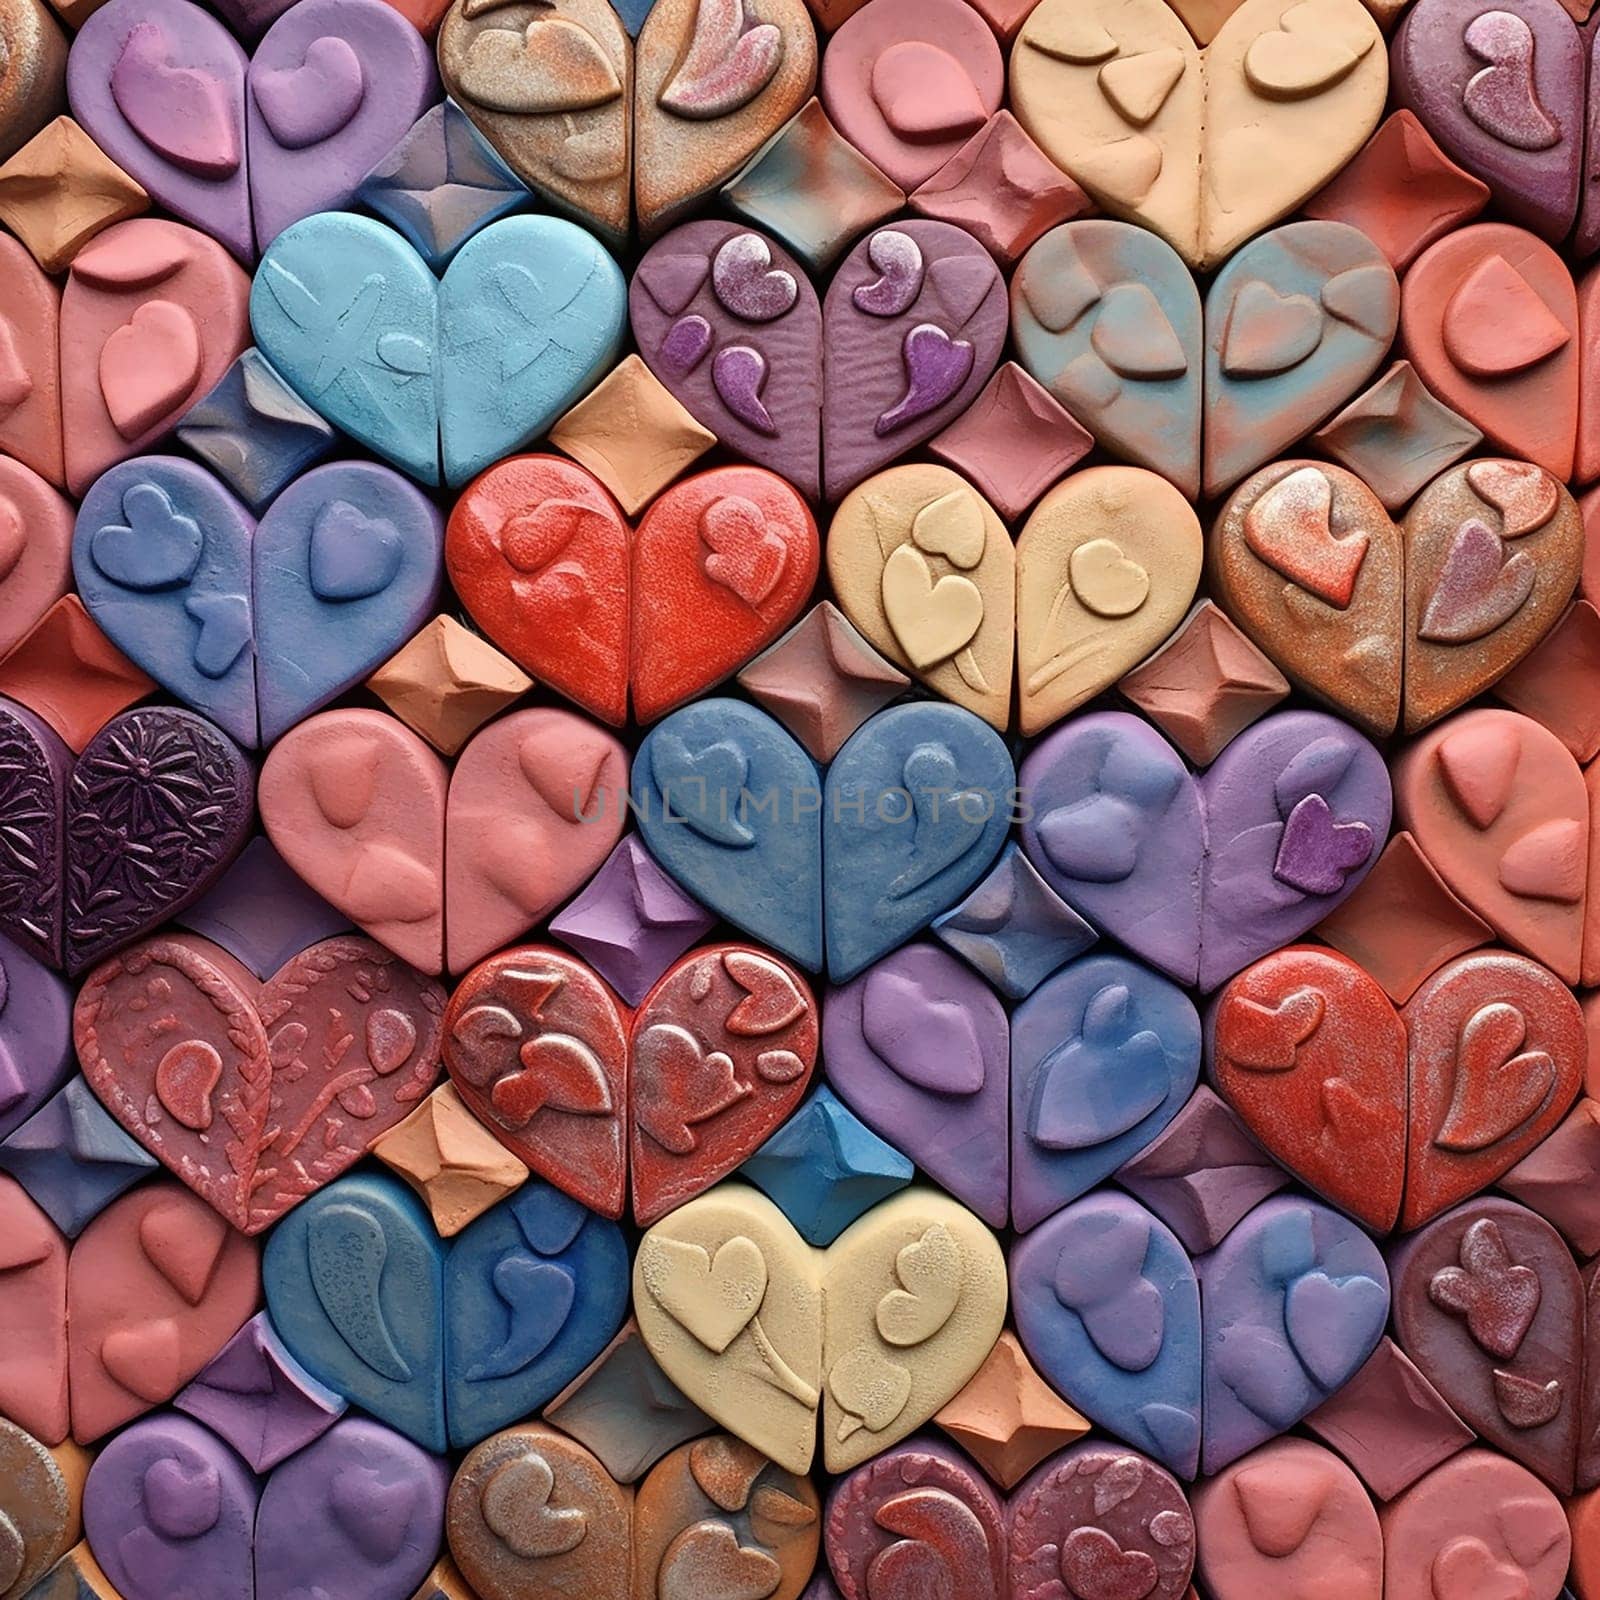 Assortment of colorful heart-shaped objects with various textures. by Hype2art